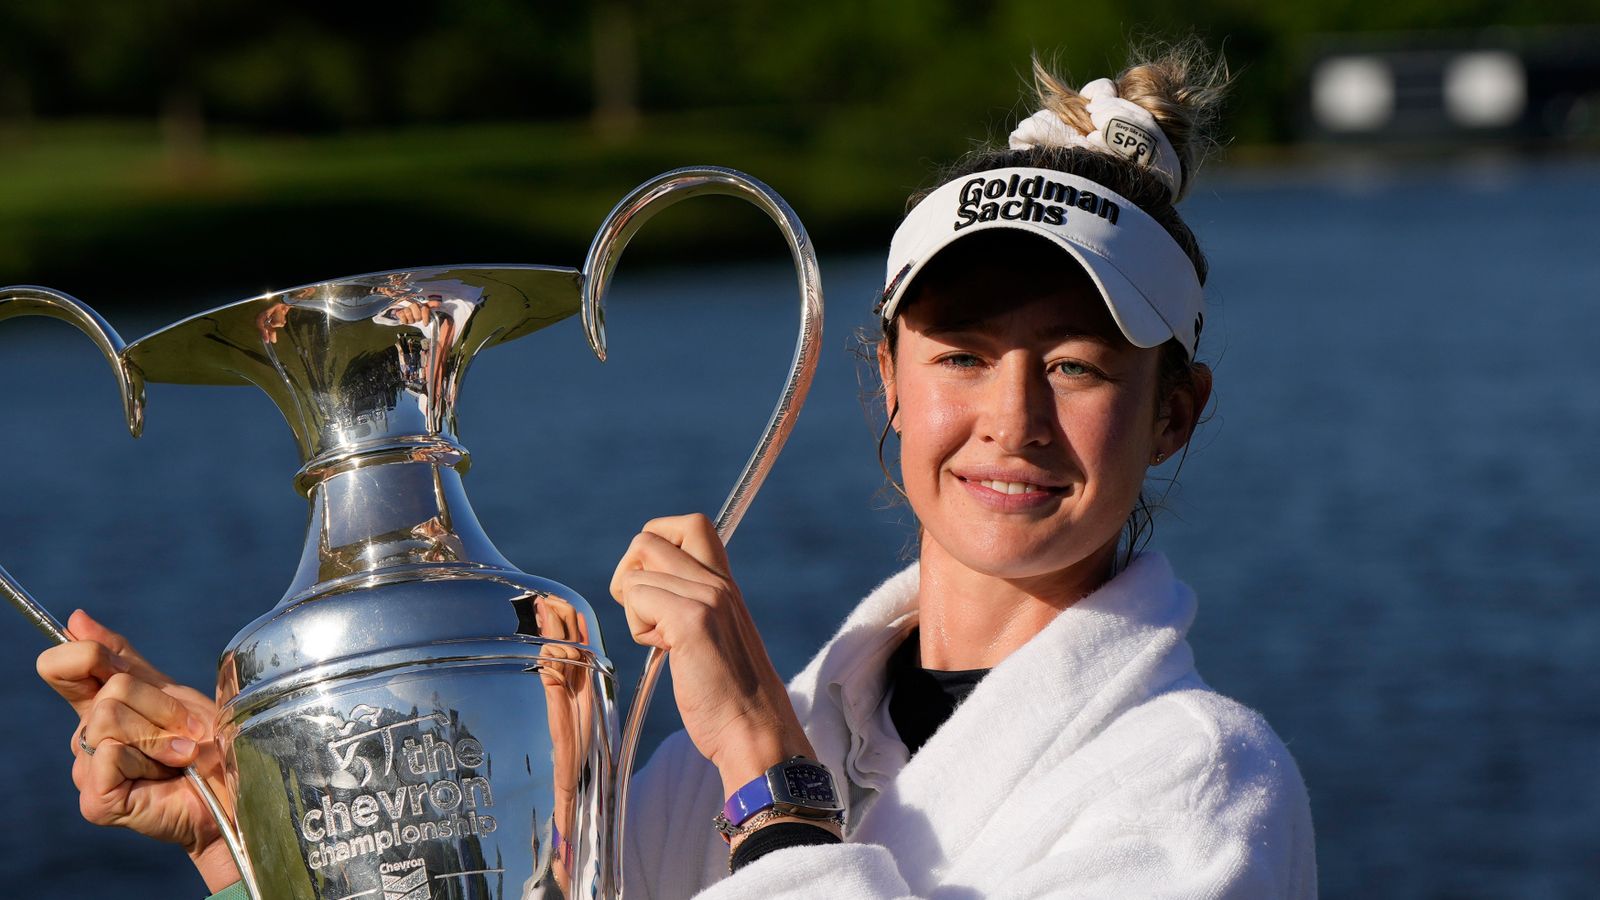 Nelly Korda Wins Fifth Consecutive LPGA Tour Event and Second Major Championship